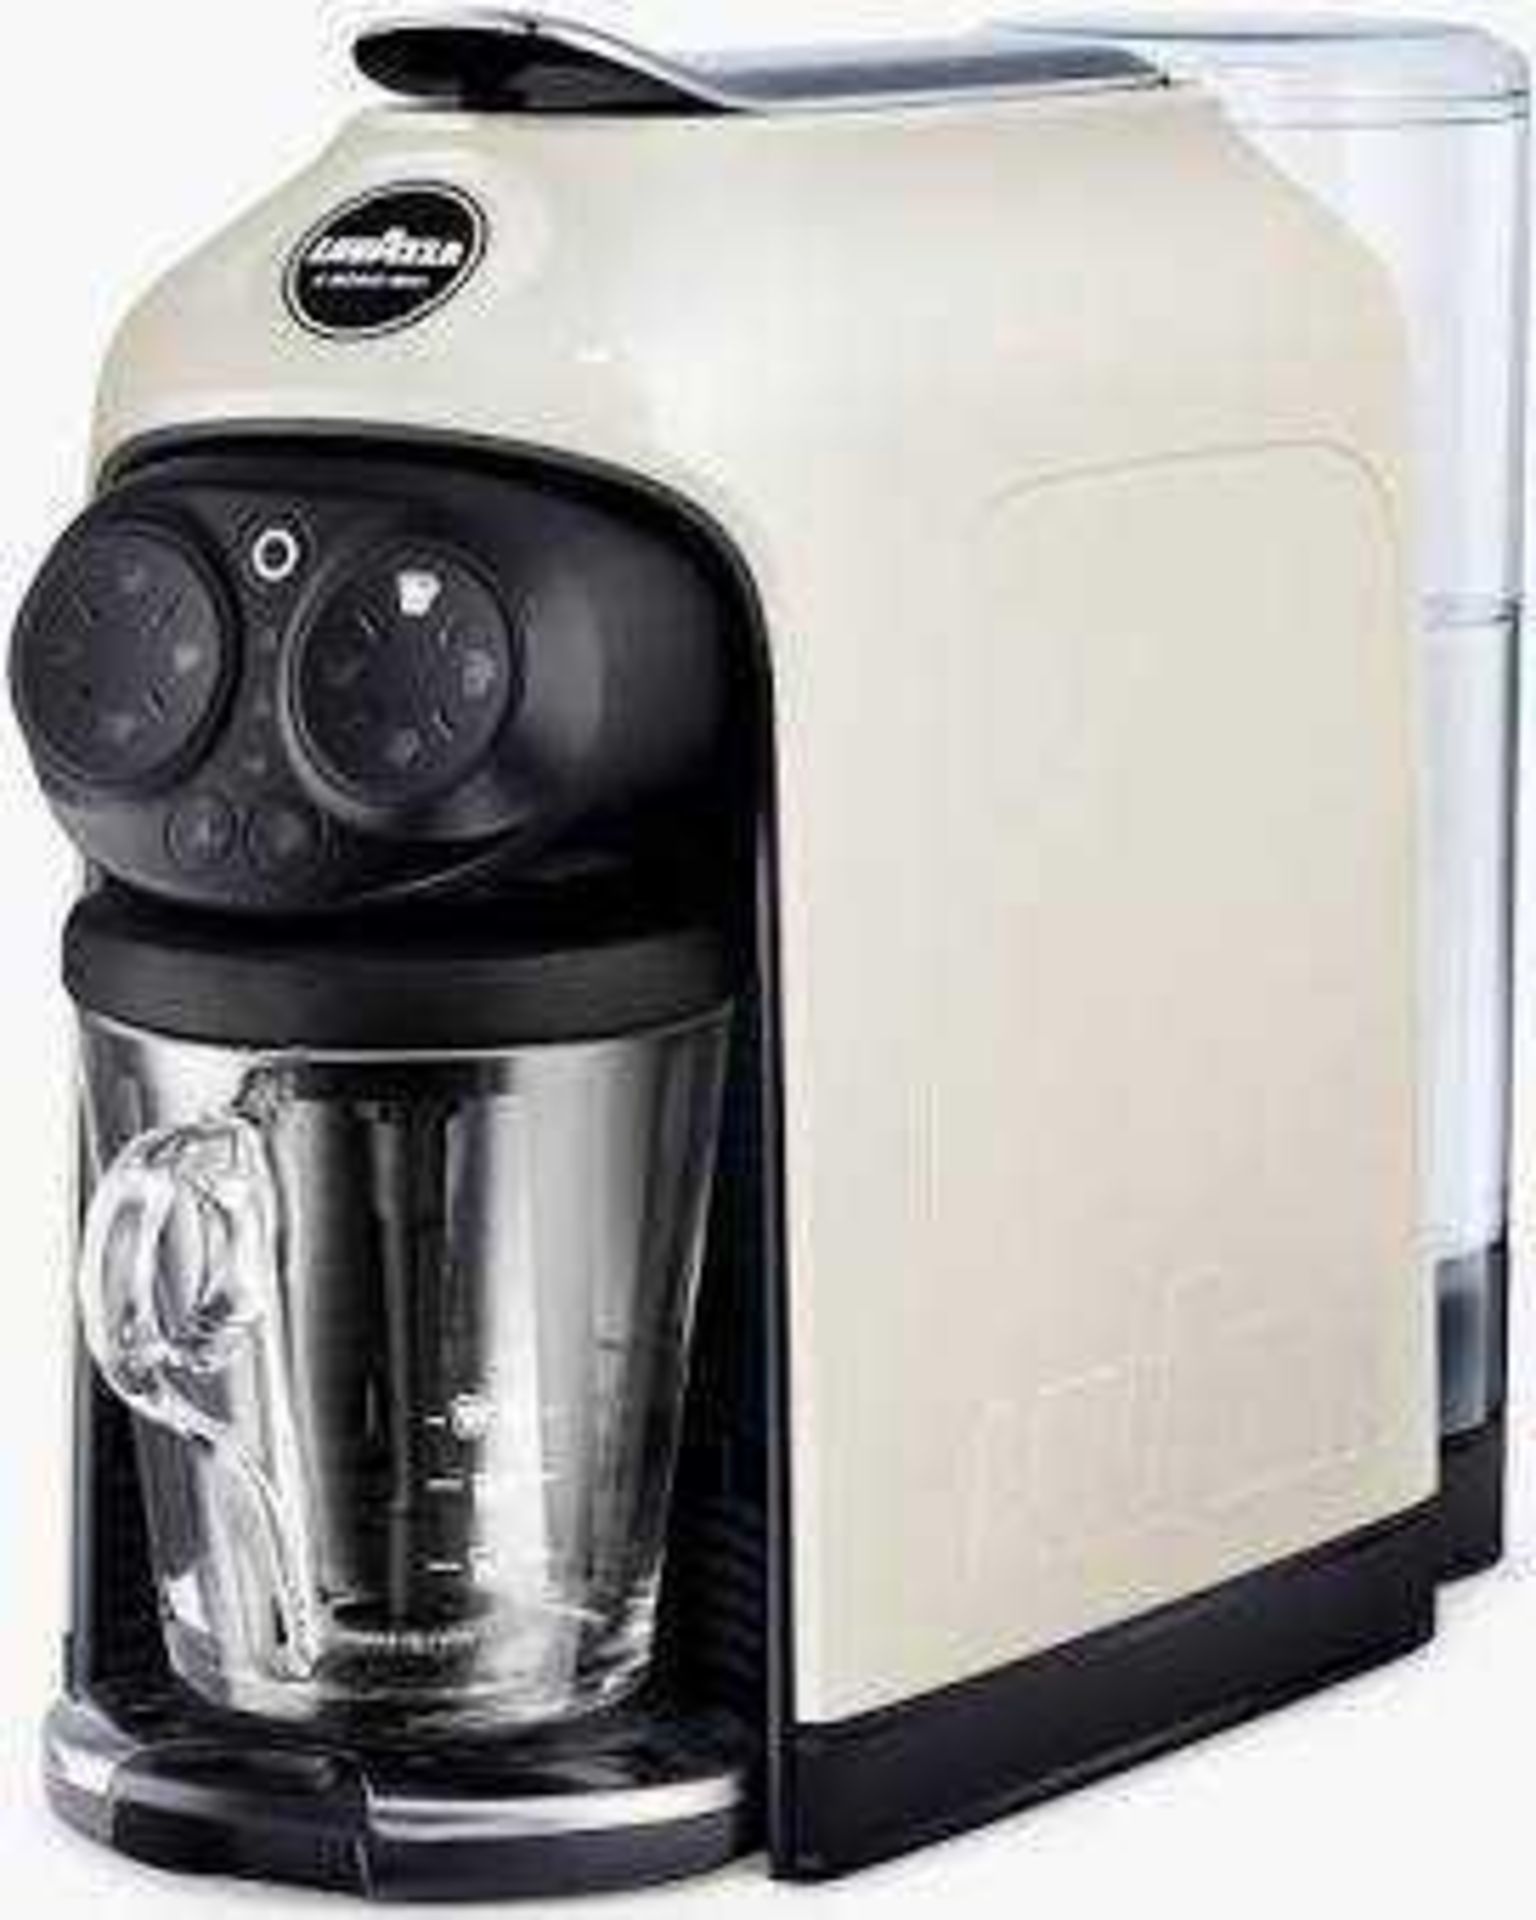 (Jb) RRP £190 Lot To Contain 1 Boxed Lavazza Desea Coffee Machine With Touch User Interface And One